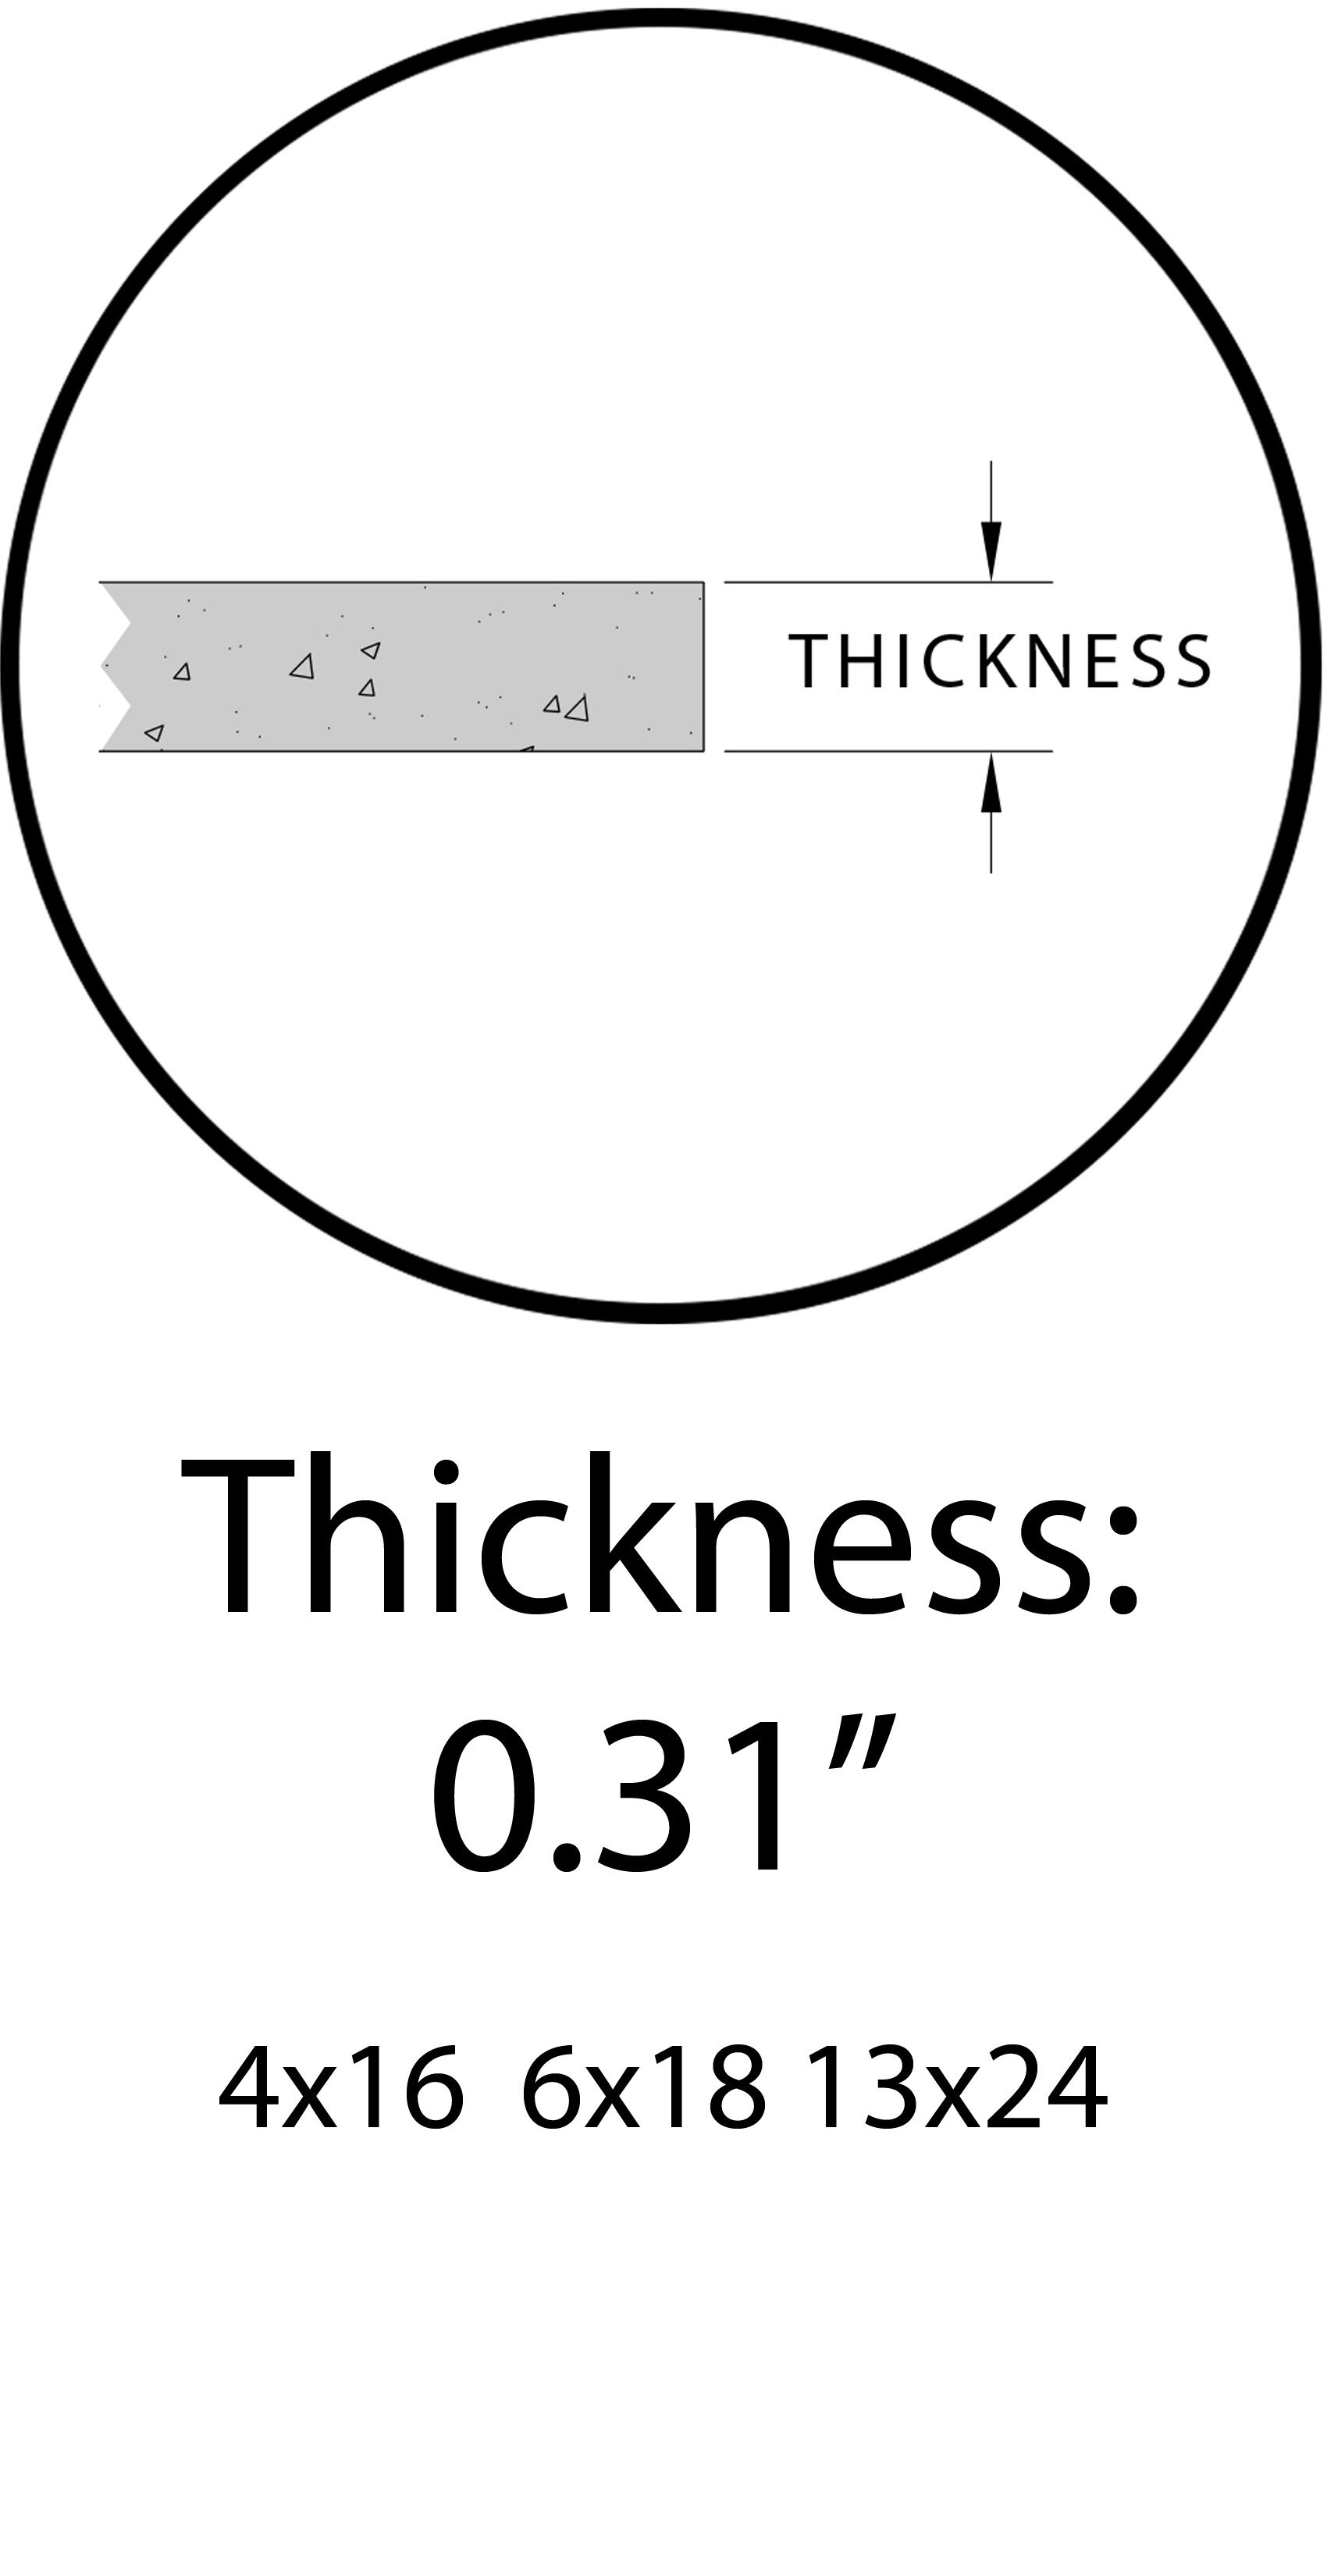 10 Thickness_0 point 31 inches.jpg